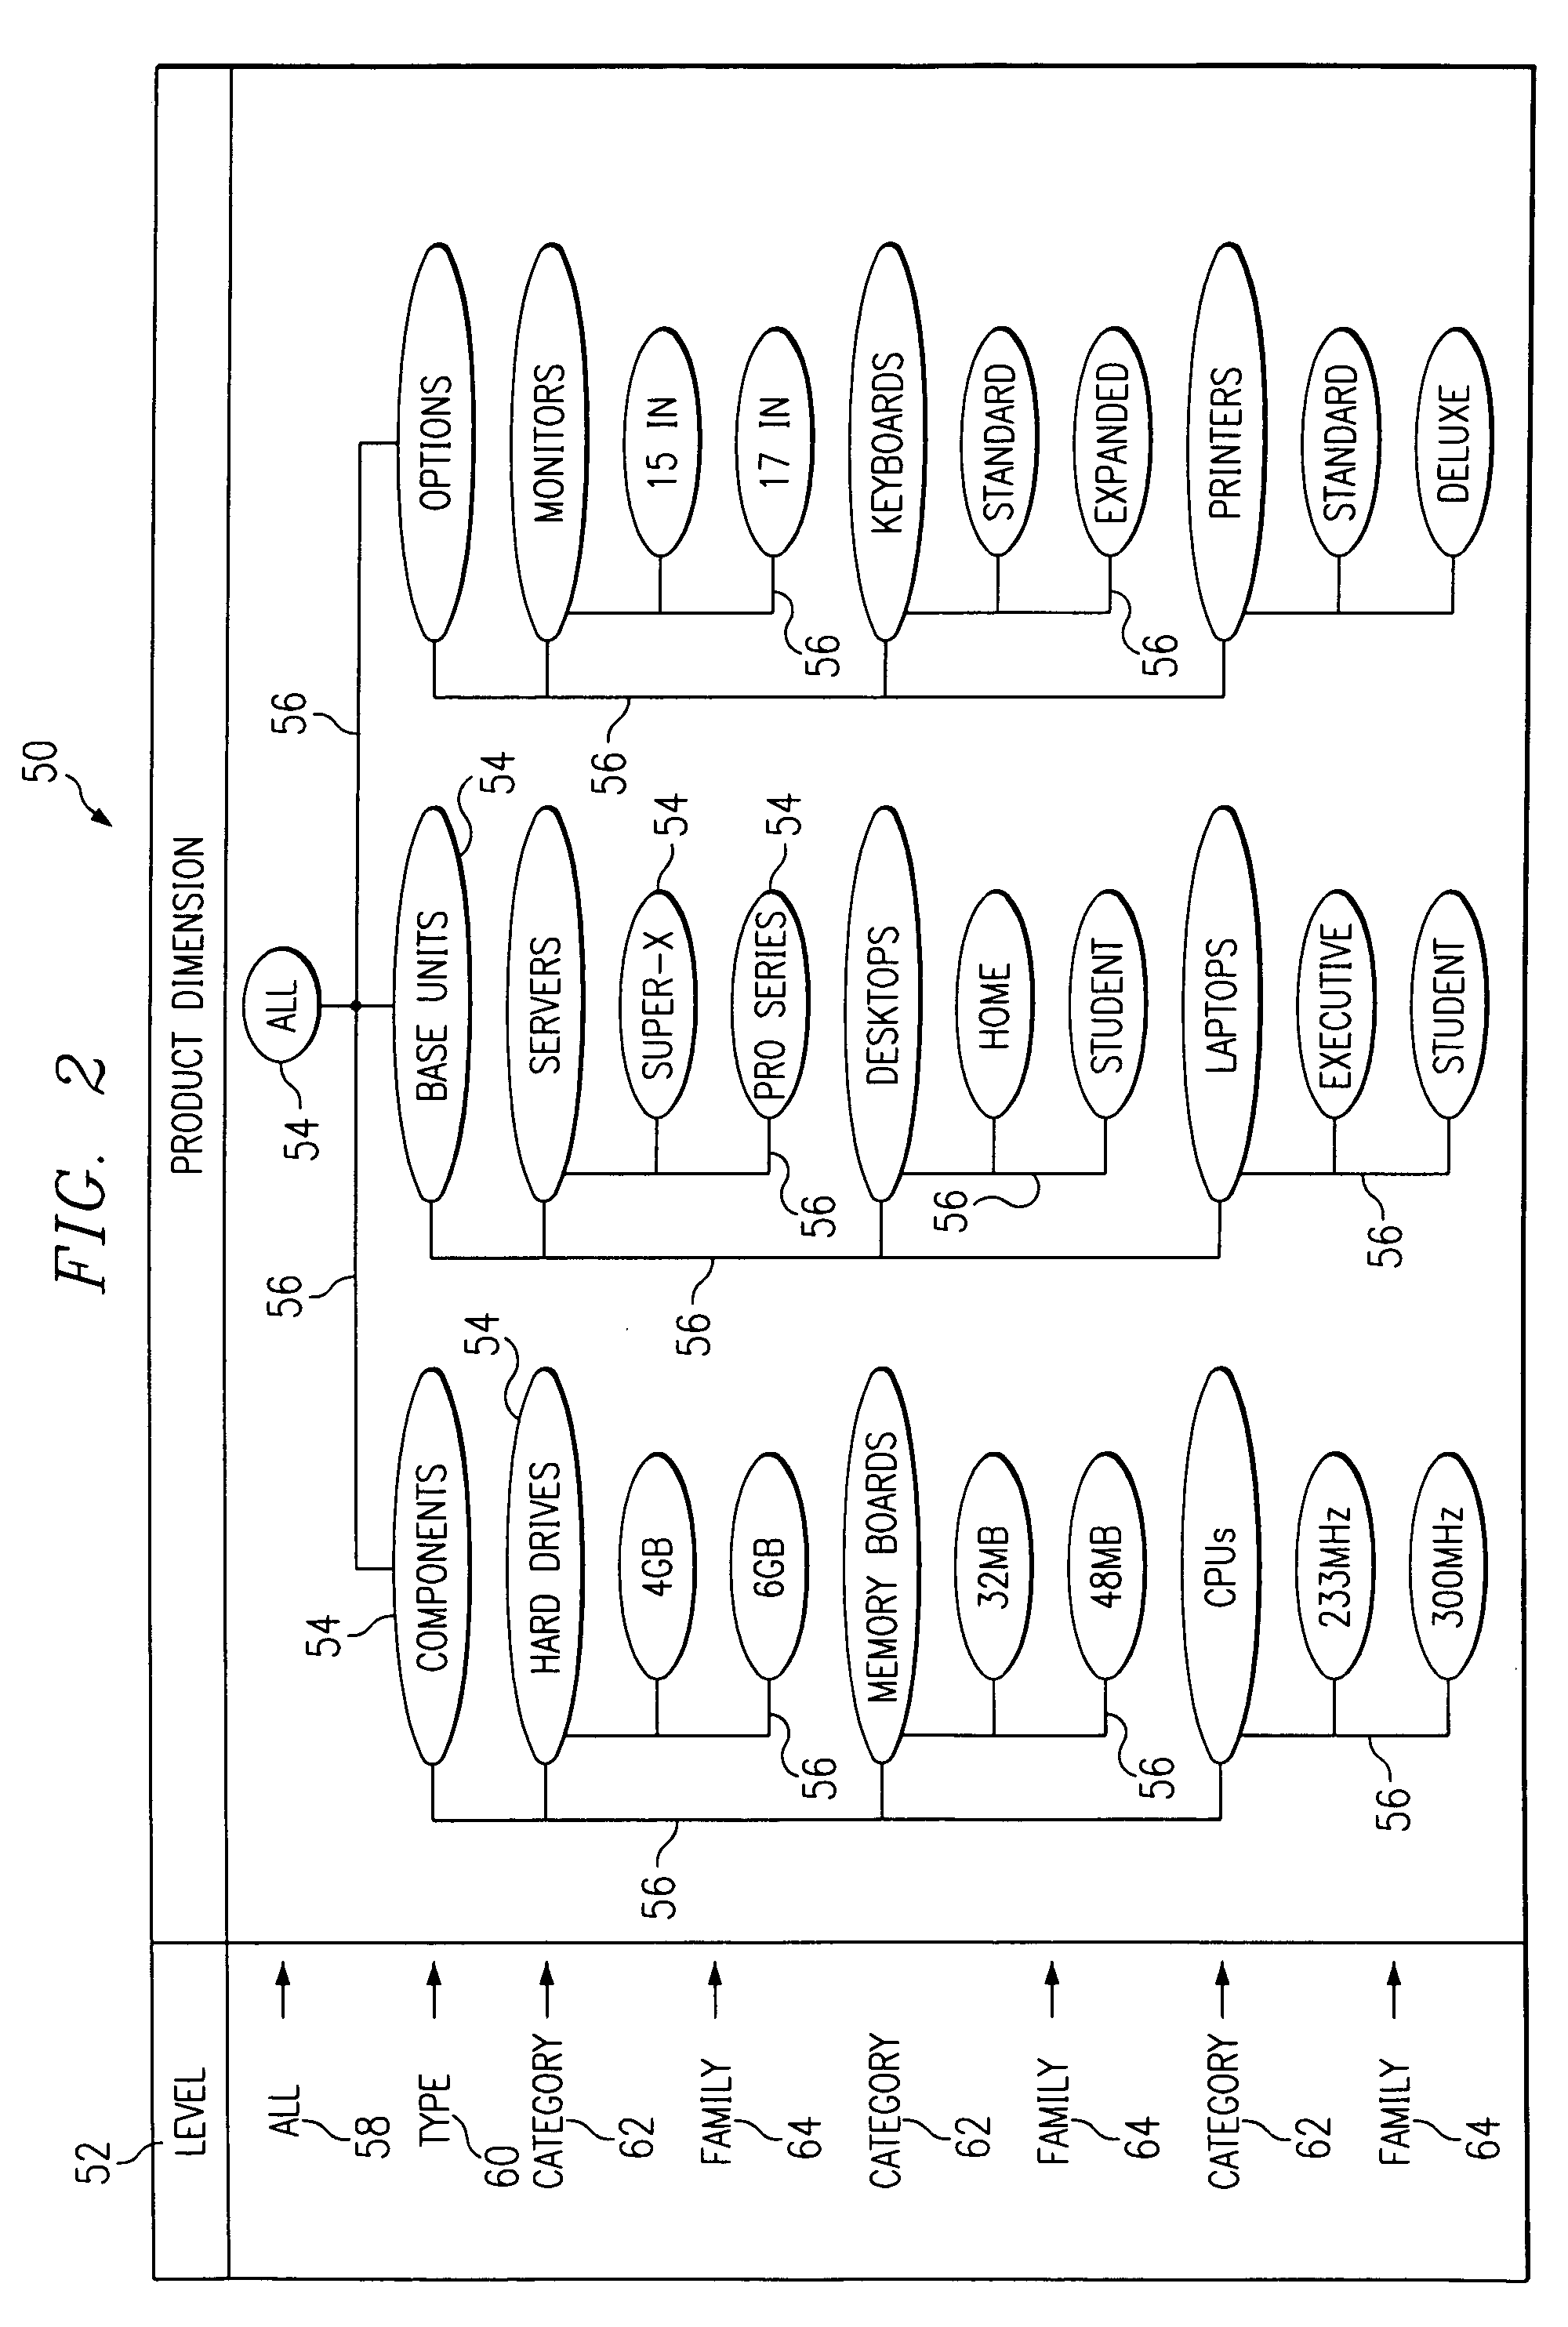 Reproducible selection of members in a hierarchy